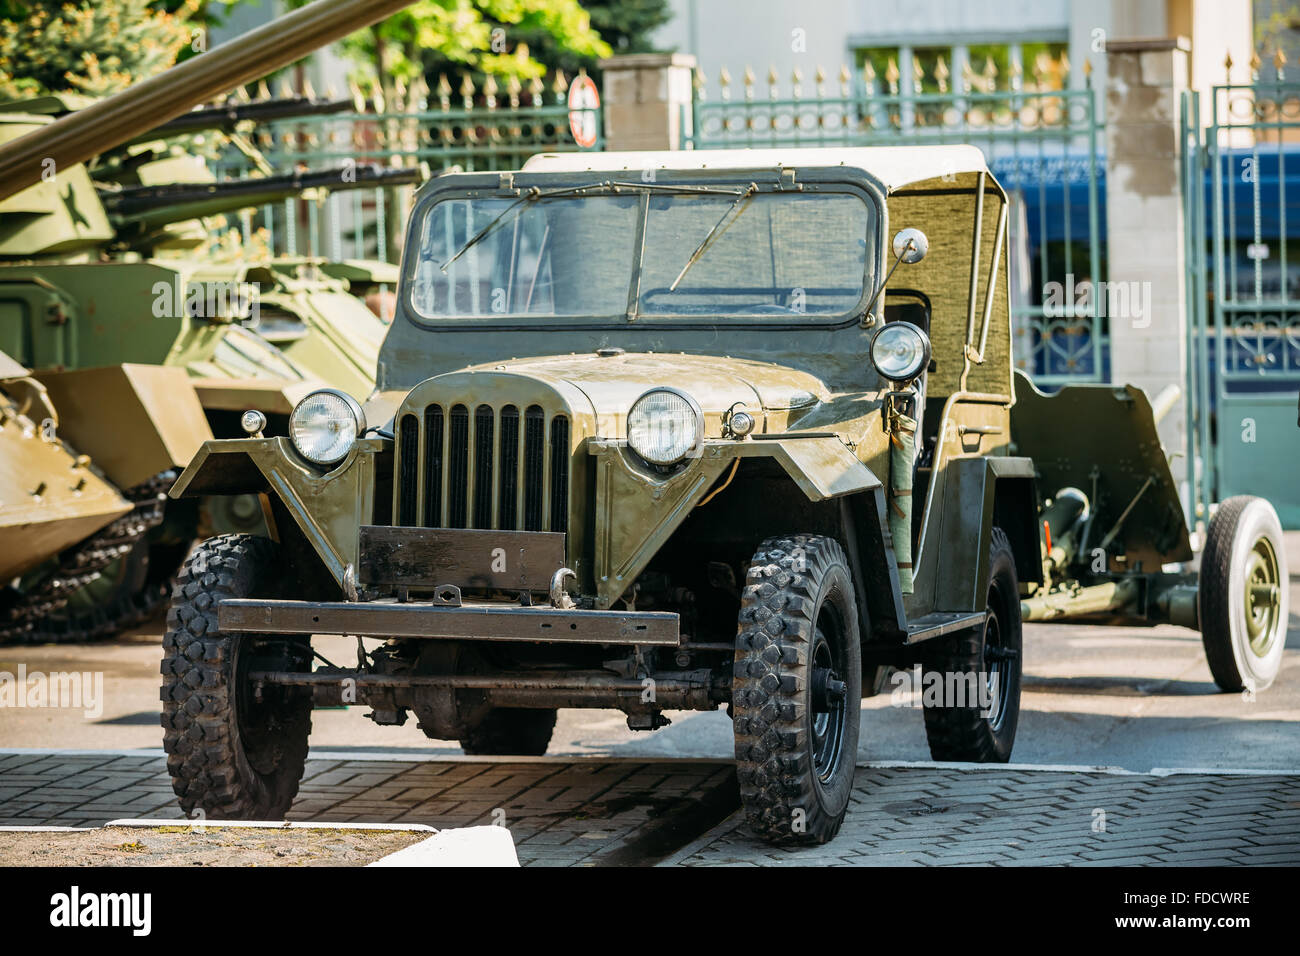 Gomel, Belarus - May 9, 2015: The GAZ-67 was a four-wheel drive utility vehicle Stock Photo